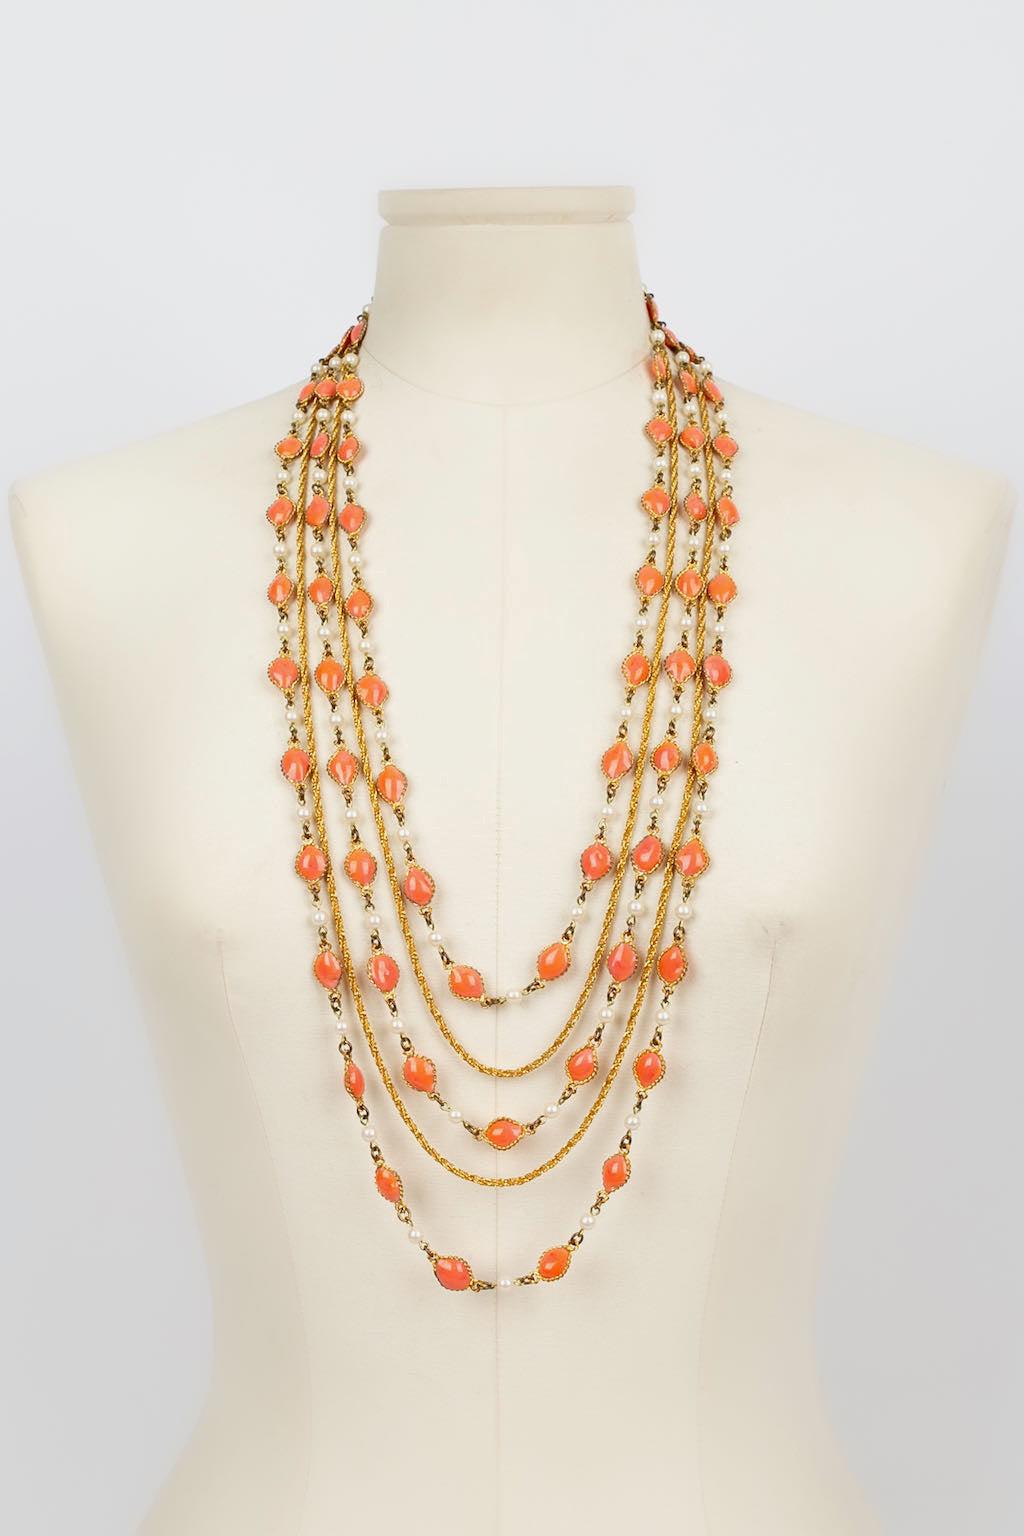 Long necklace made of gold metal, glass paste and pearly beads.

Additional information: 
Dimensions: Length : 72 cm
Condition: Very good condition
Seller Ref number: BC280